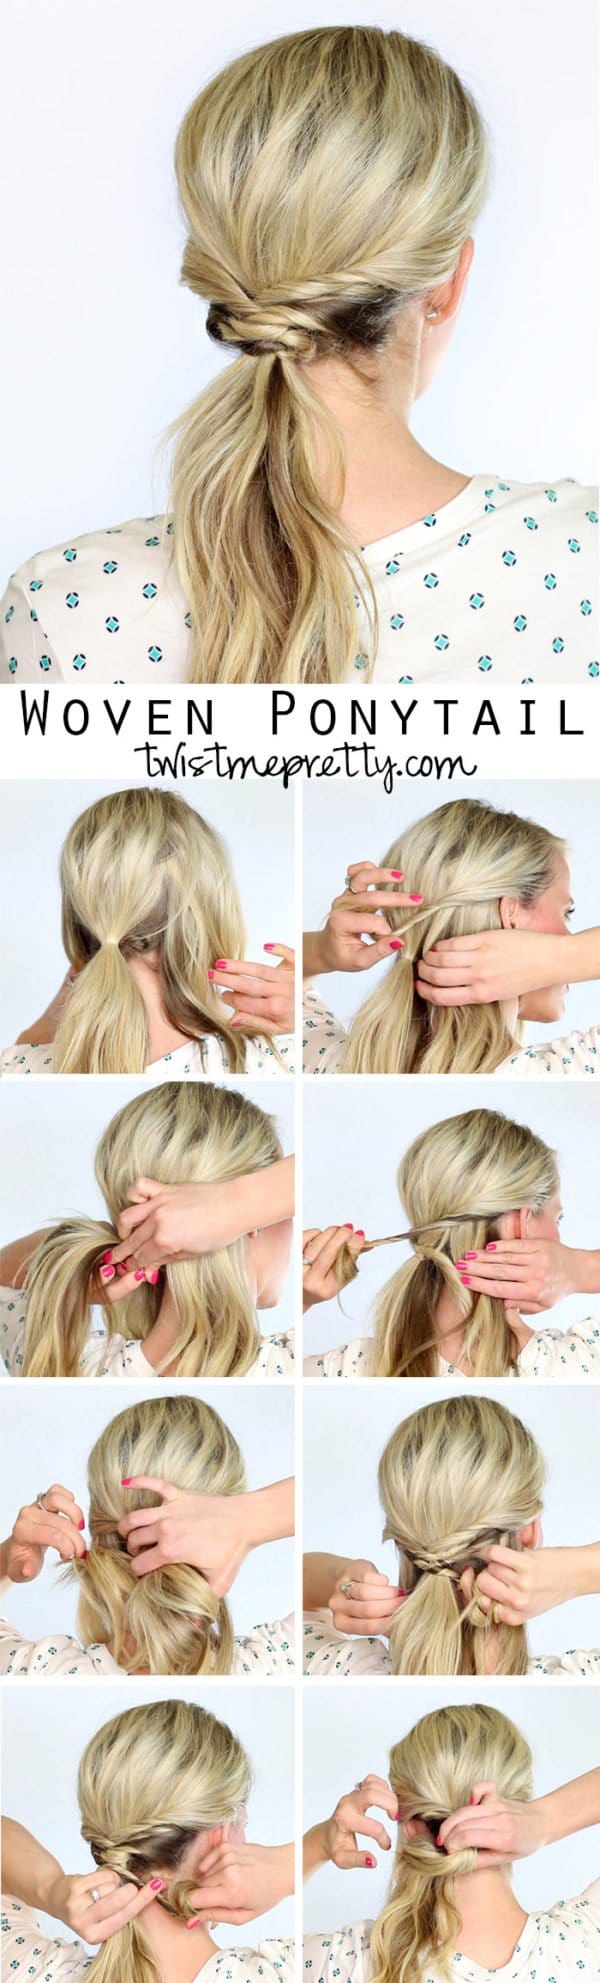 Easy Step By Step Hairstyle Tutorials You Can Do For Less Than 5 Minutes